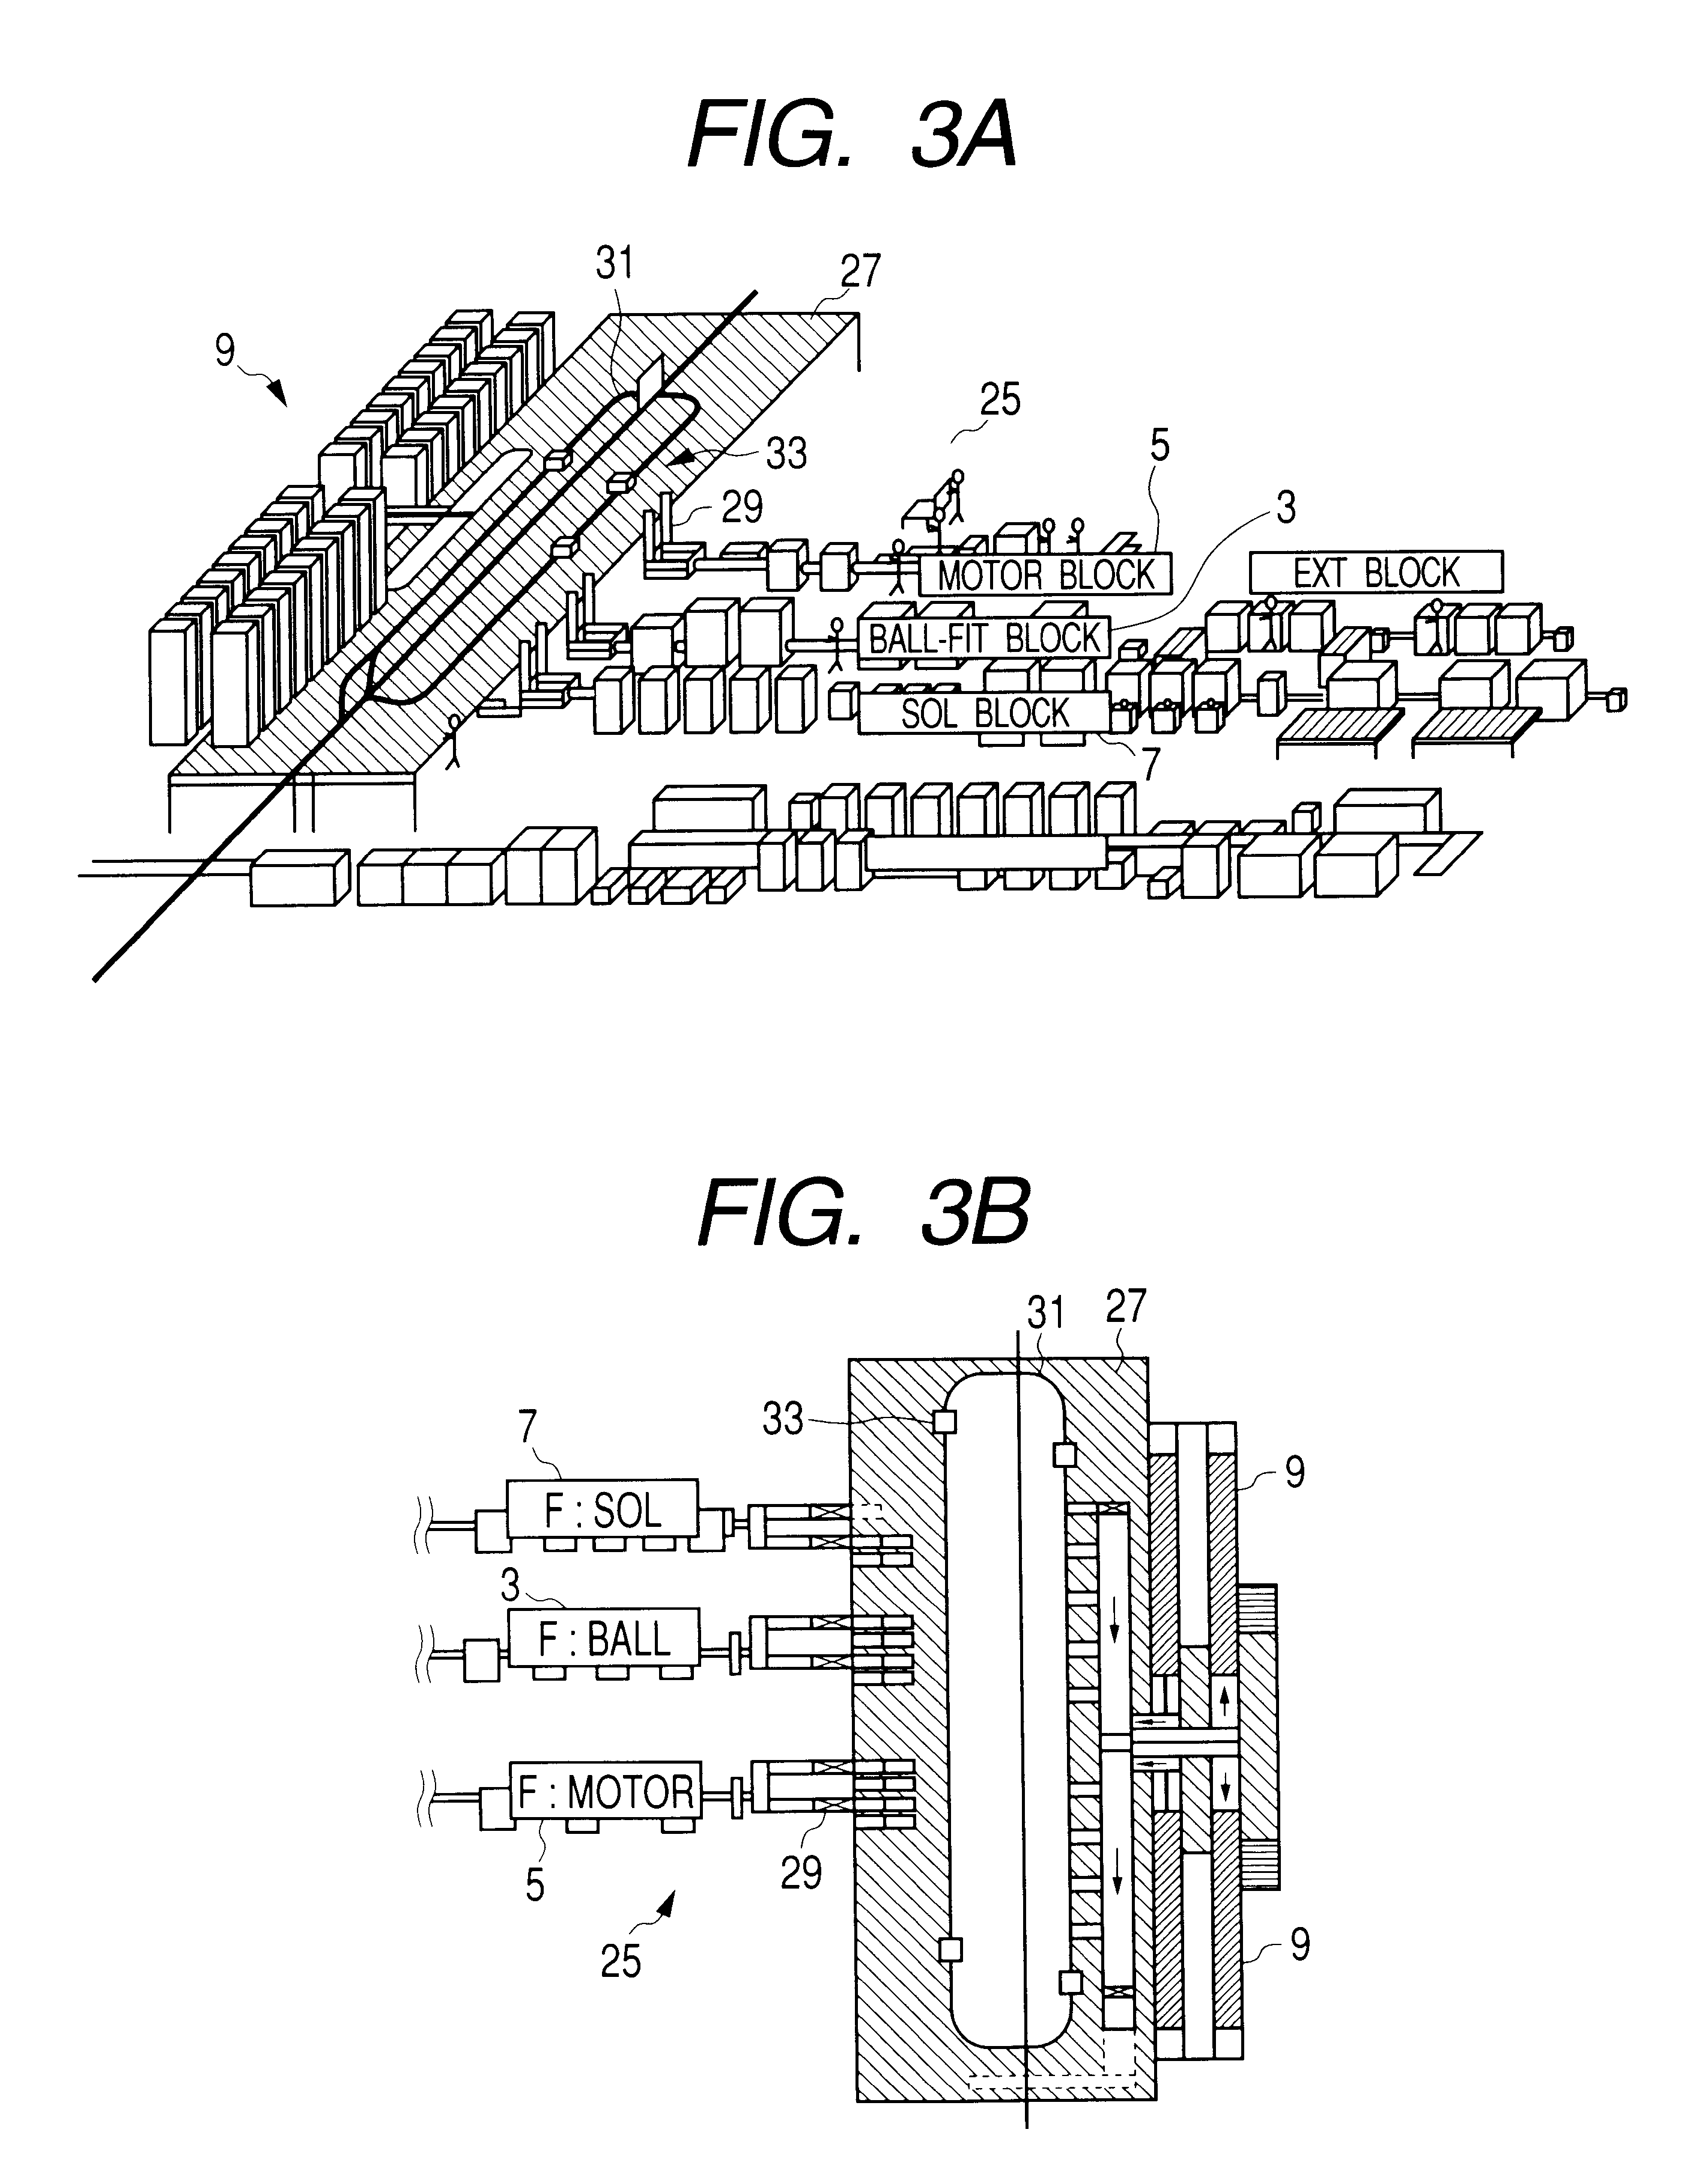 Production method and a production system